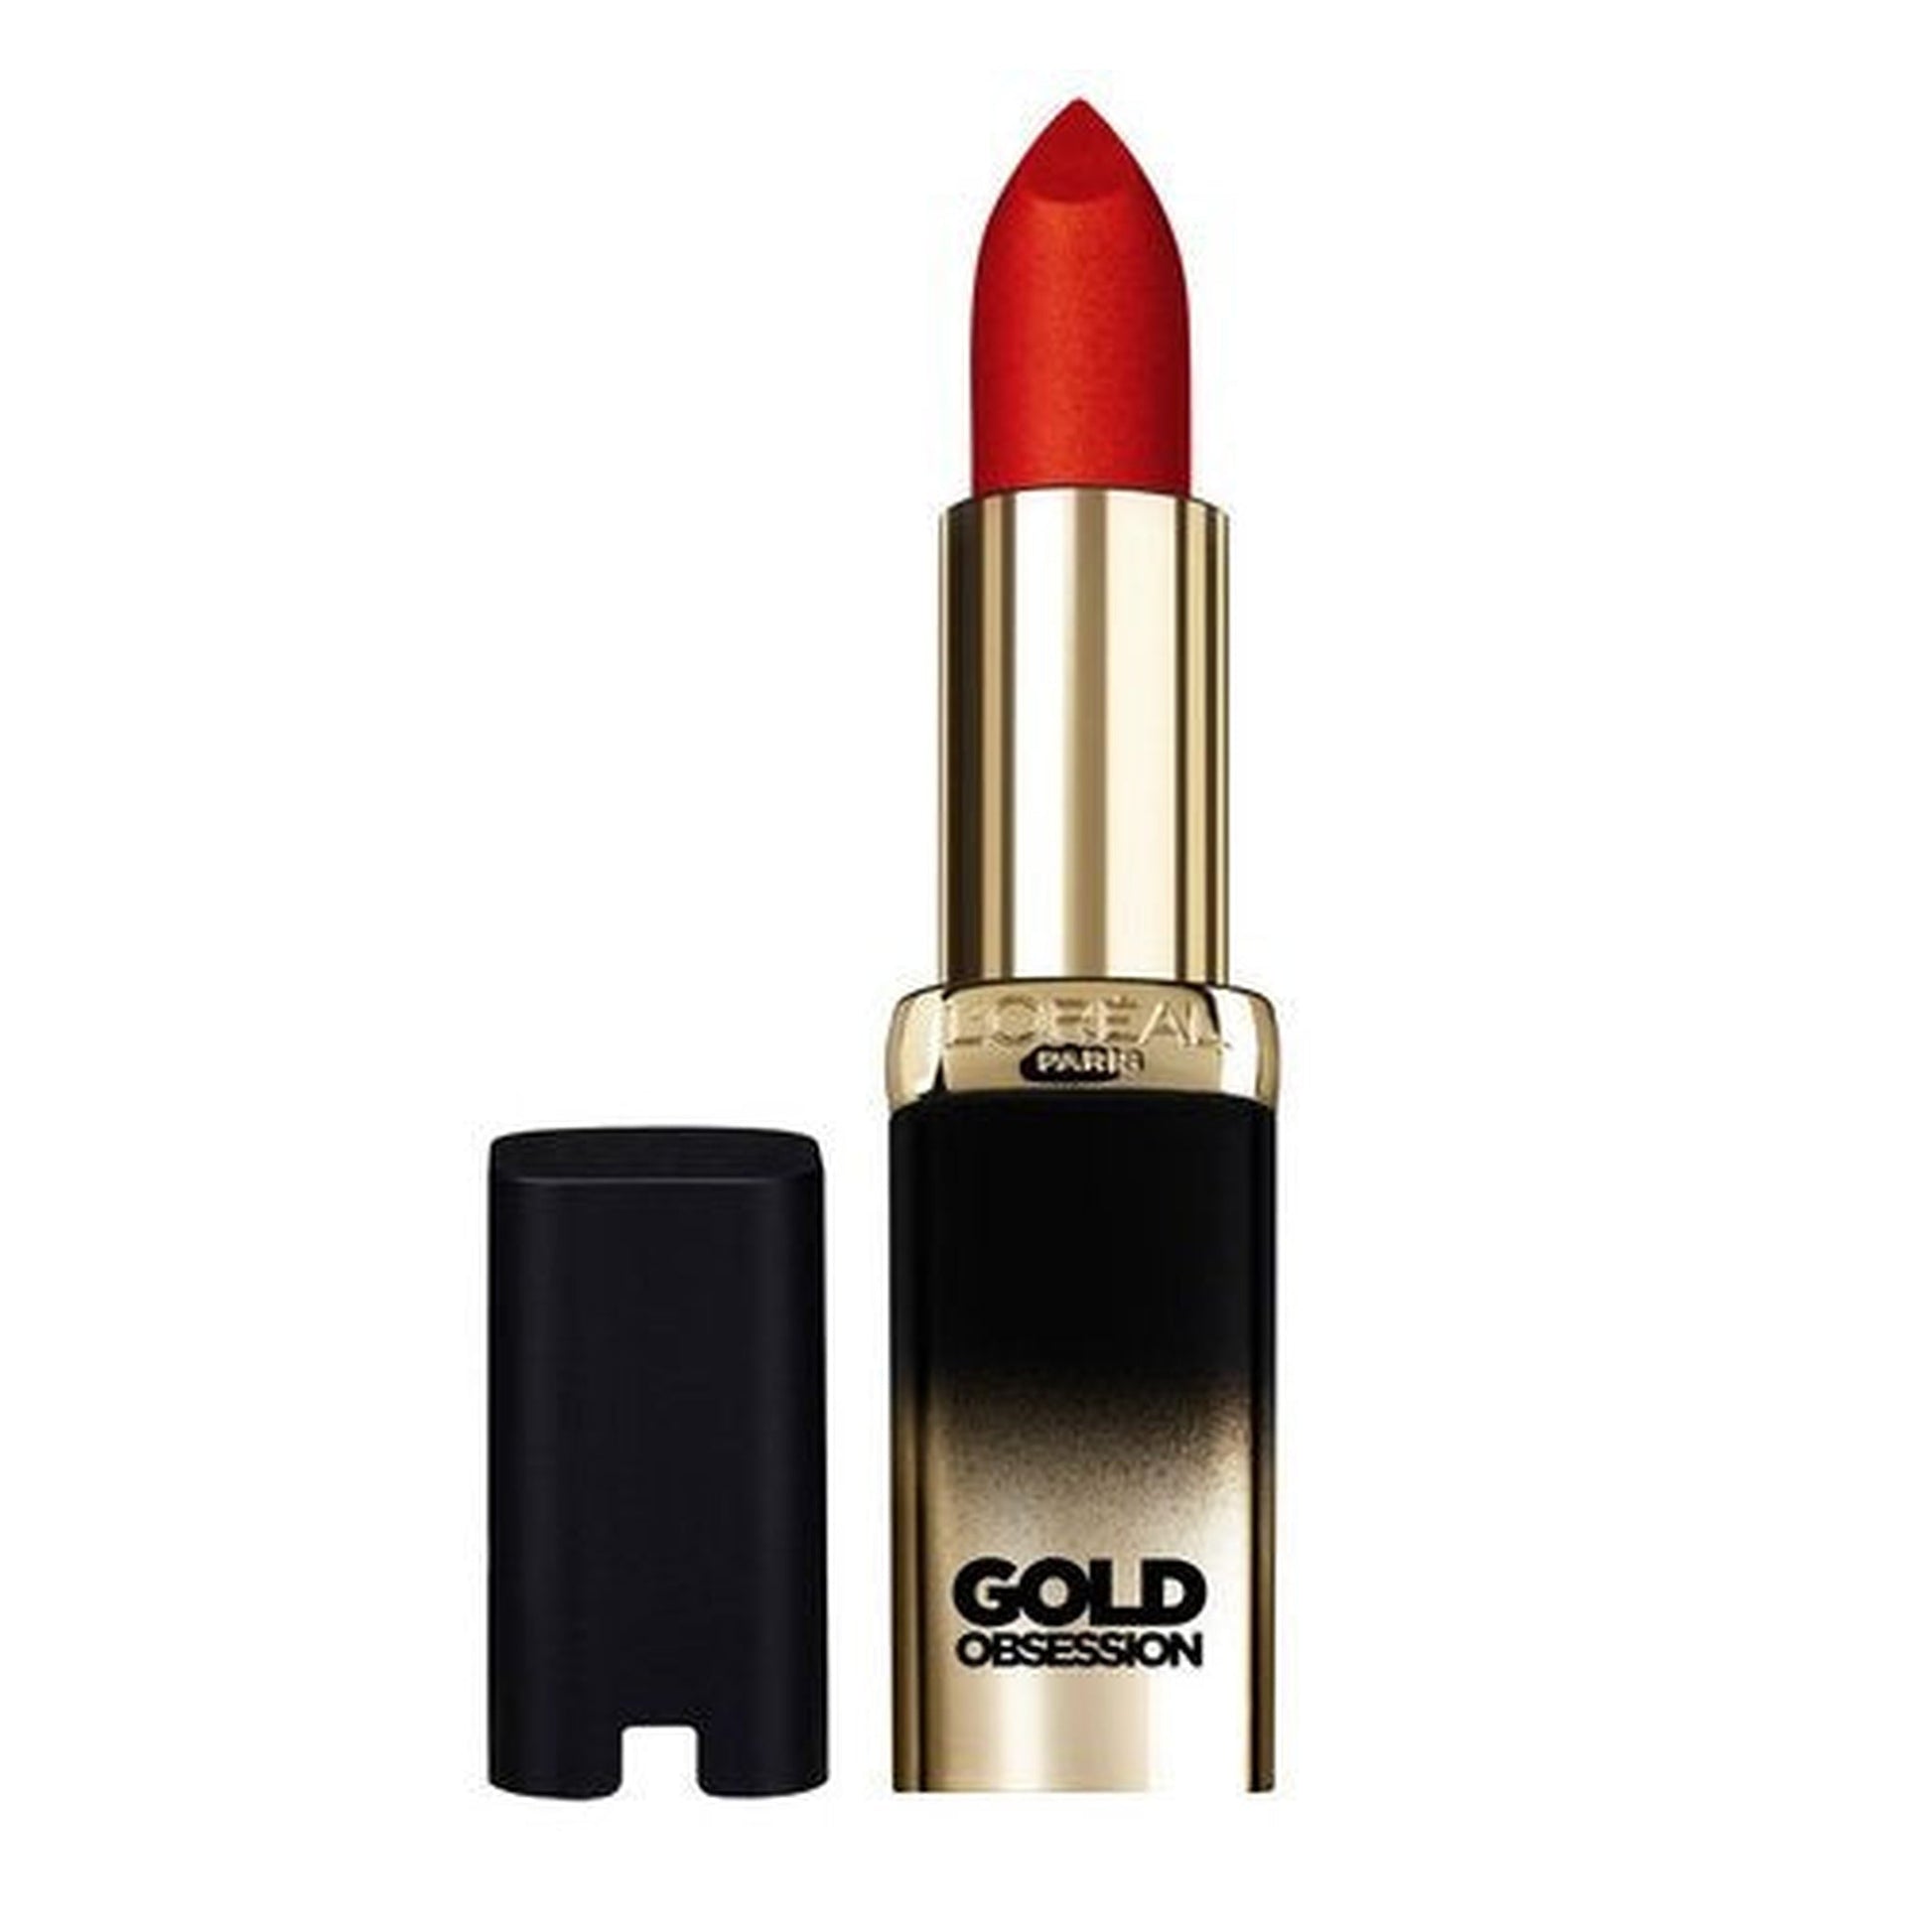 L'Oreal Color Riche Gold Obsession Lipstick - ROUGE GOLD-L'Oreal-BeautyNmakeup.co.uk